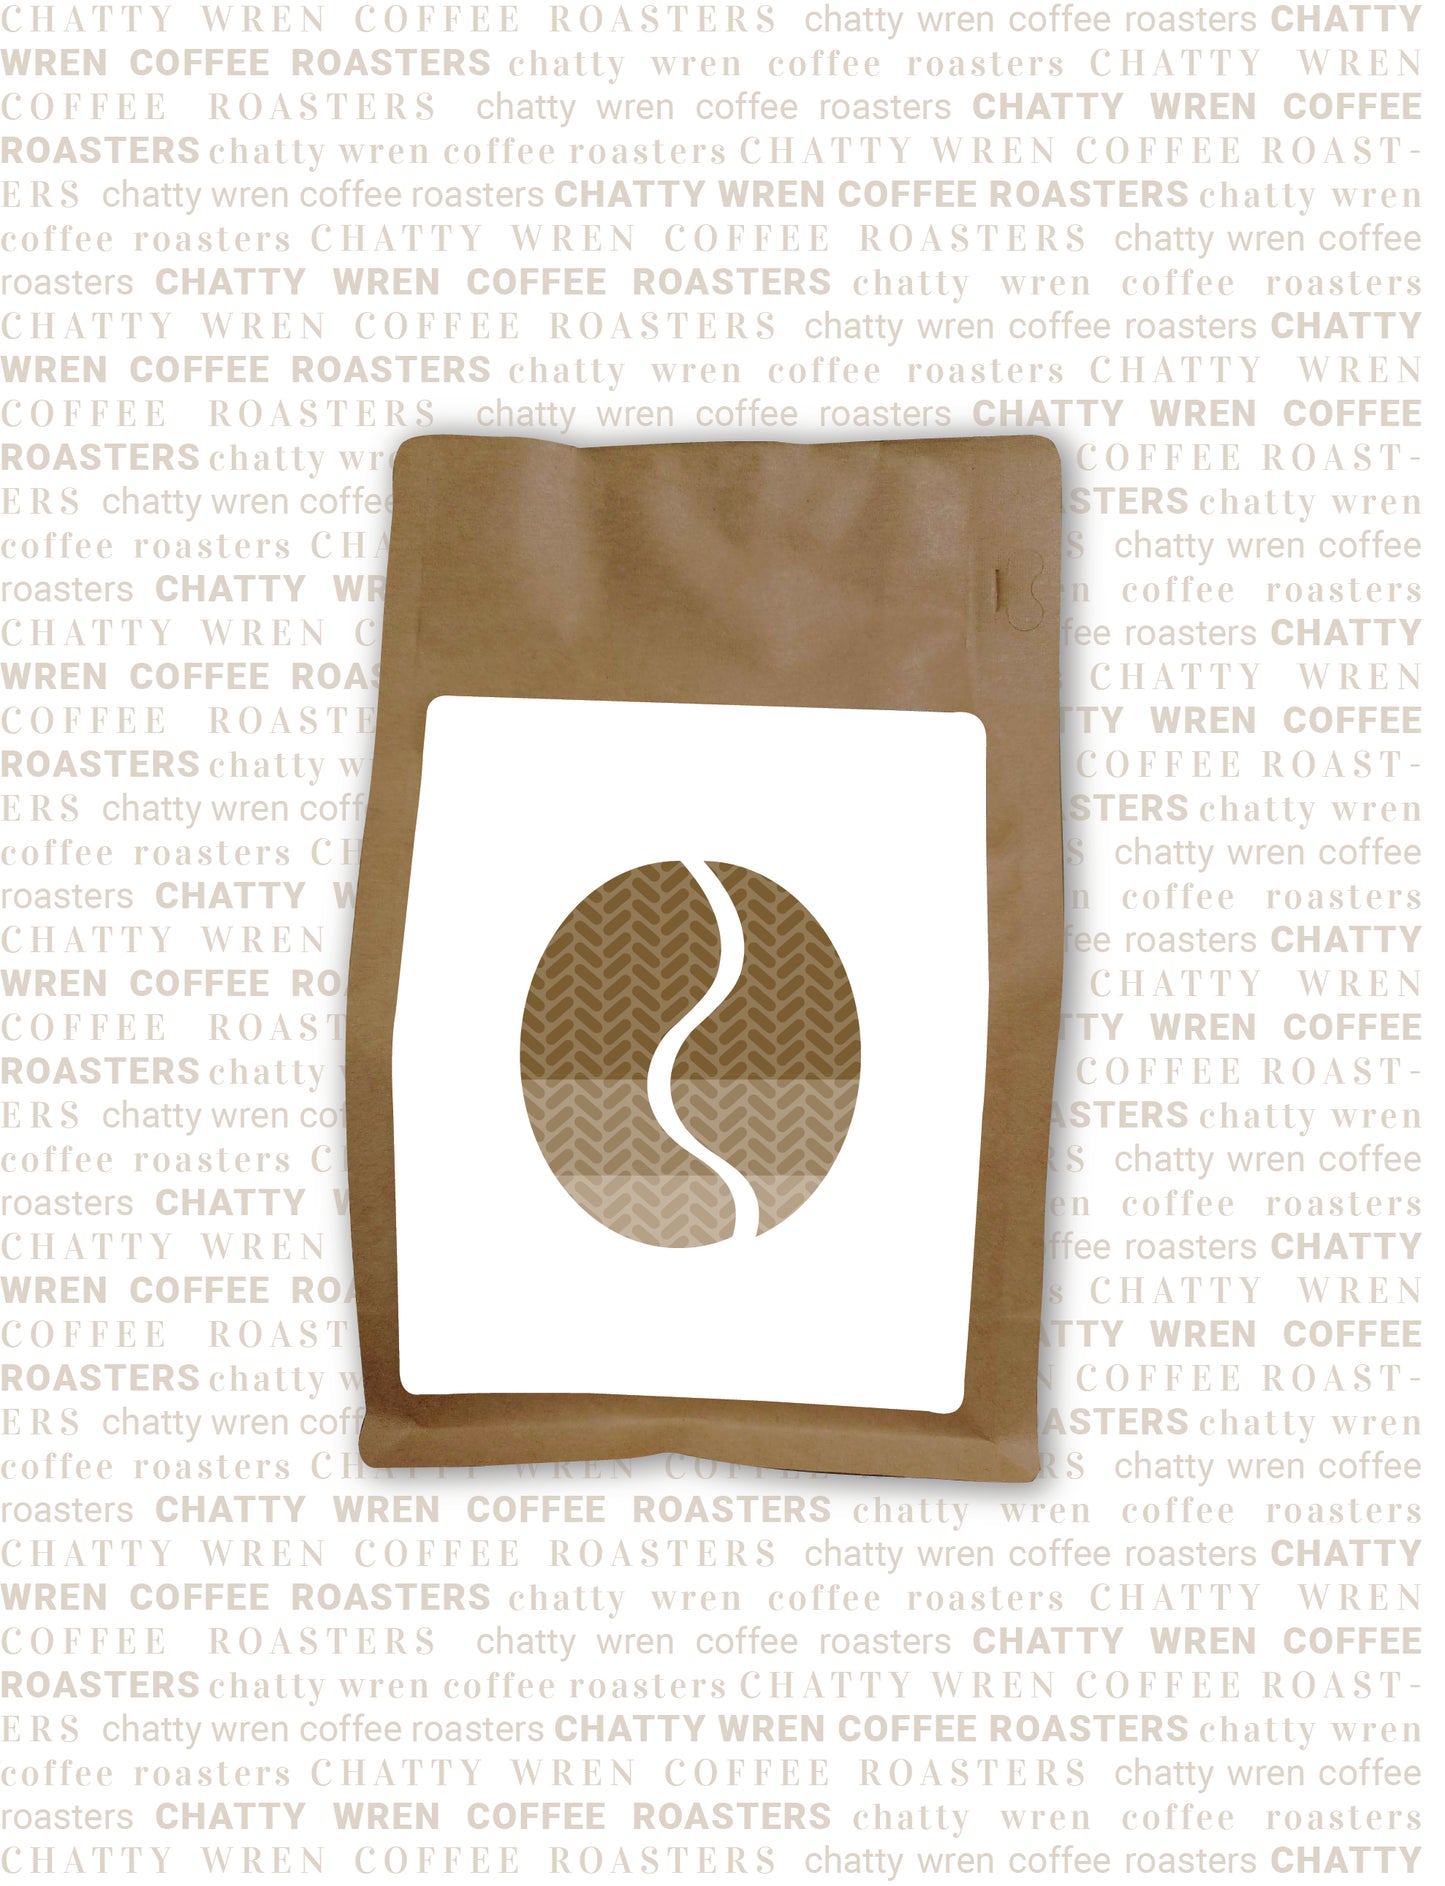 Chatty Wren coffee bag with a white label and a coffee bean